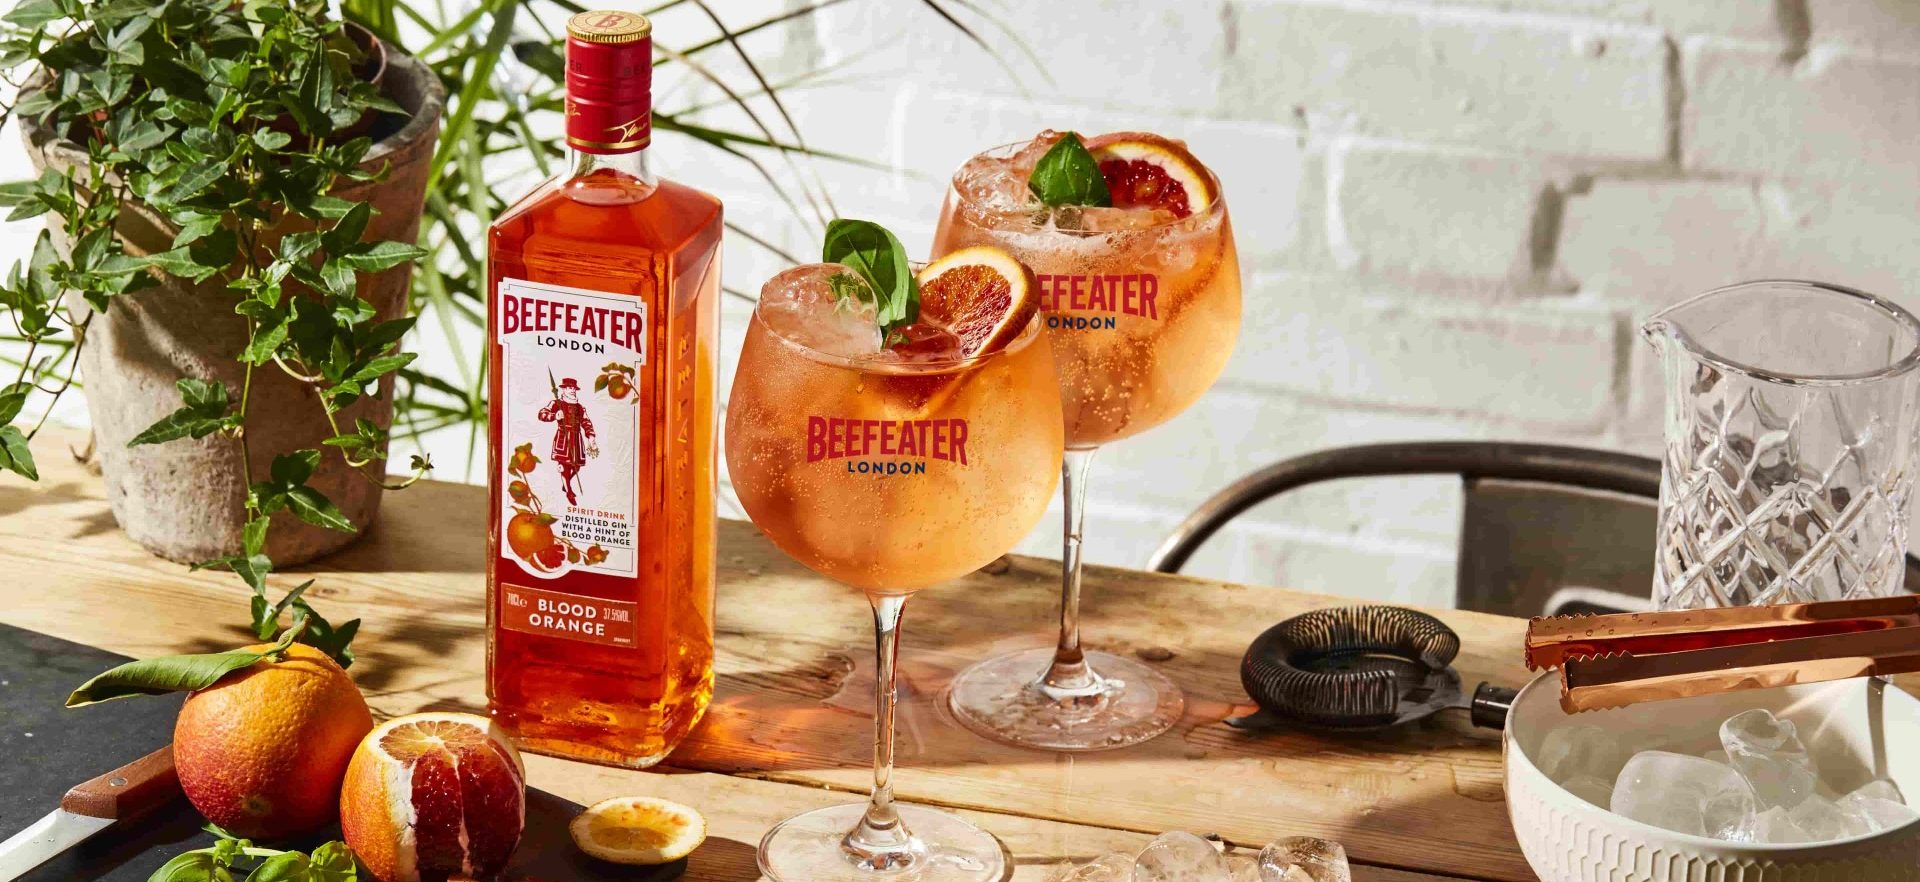 beefeater blood orange gin tonic cocktail 1 aspect ratio 1647 756